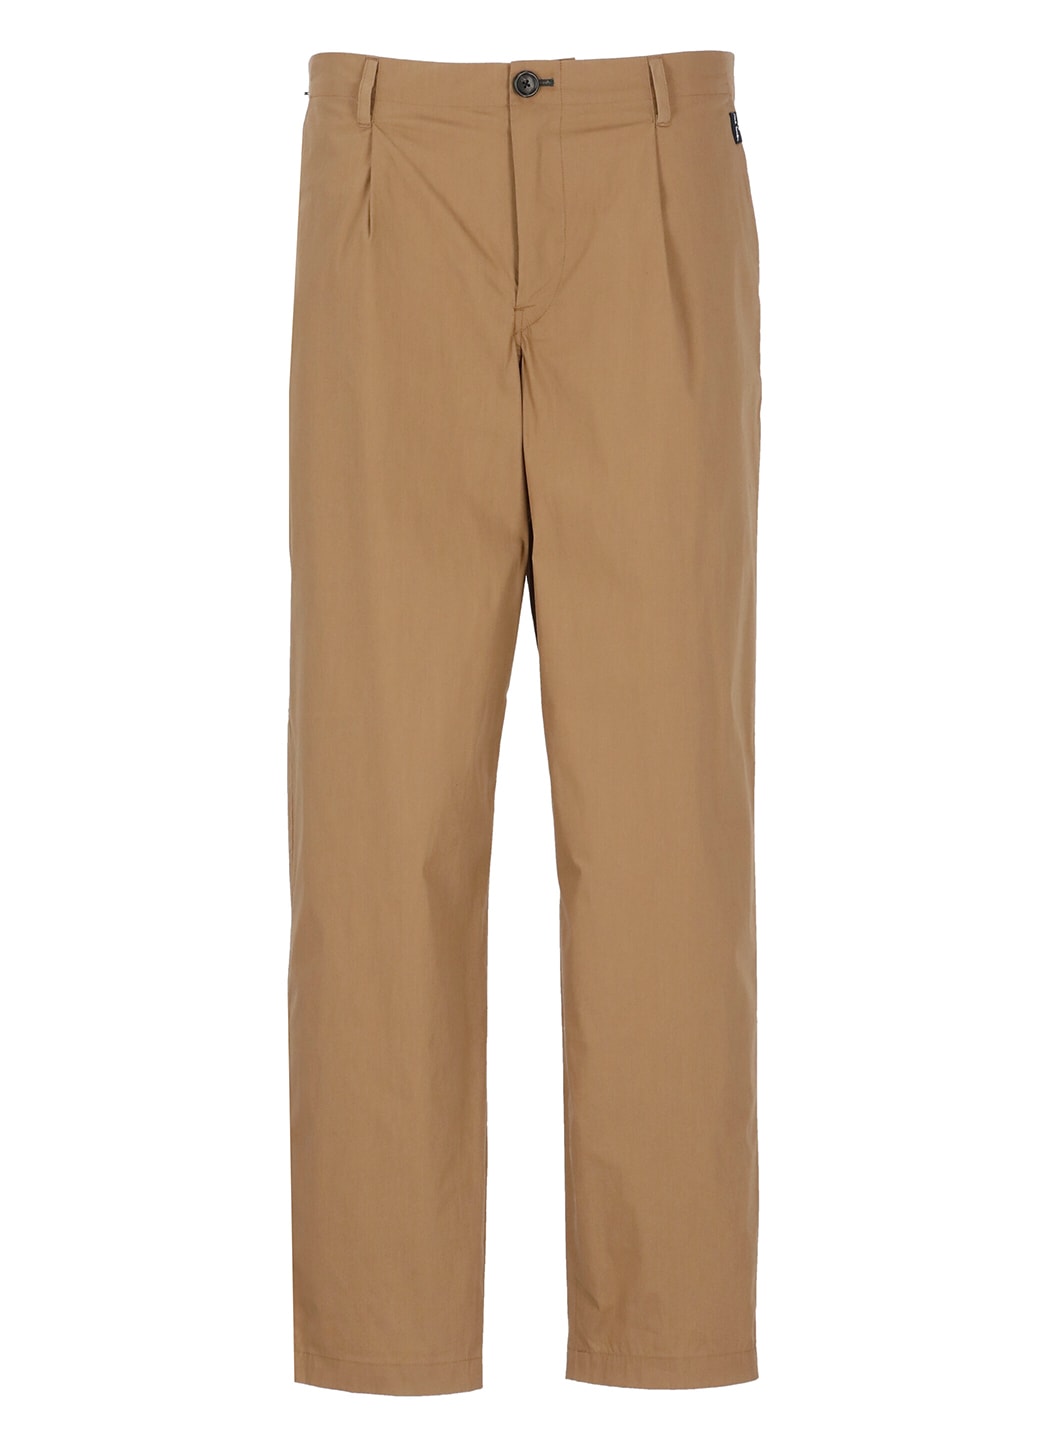 PAUL SMITH COTTON TROUSERS